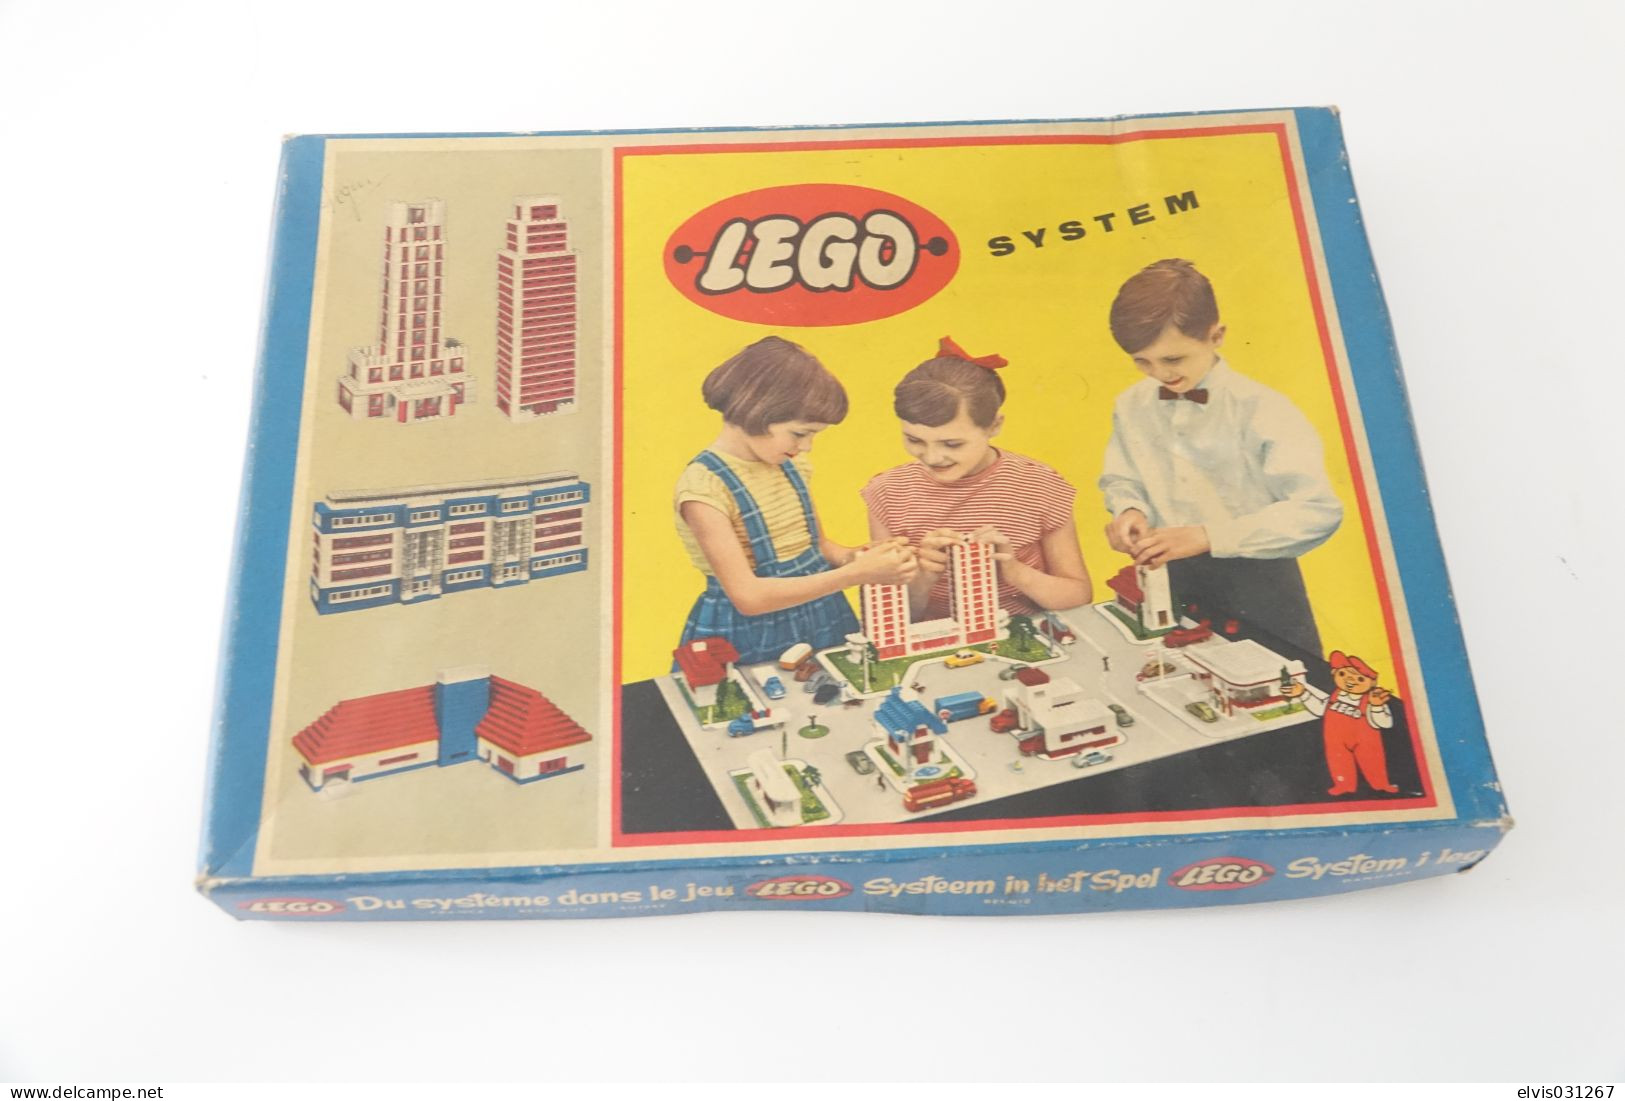 LEGO - 700/3a Gift Package (Lego Mursten) Extremely Rare BOX ONLY - Collector Item - Original Lego 1954 - Vintage - Catalogues